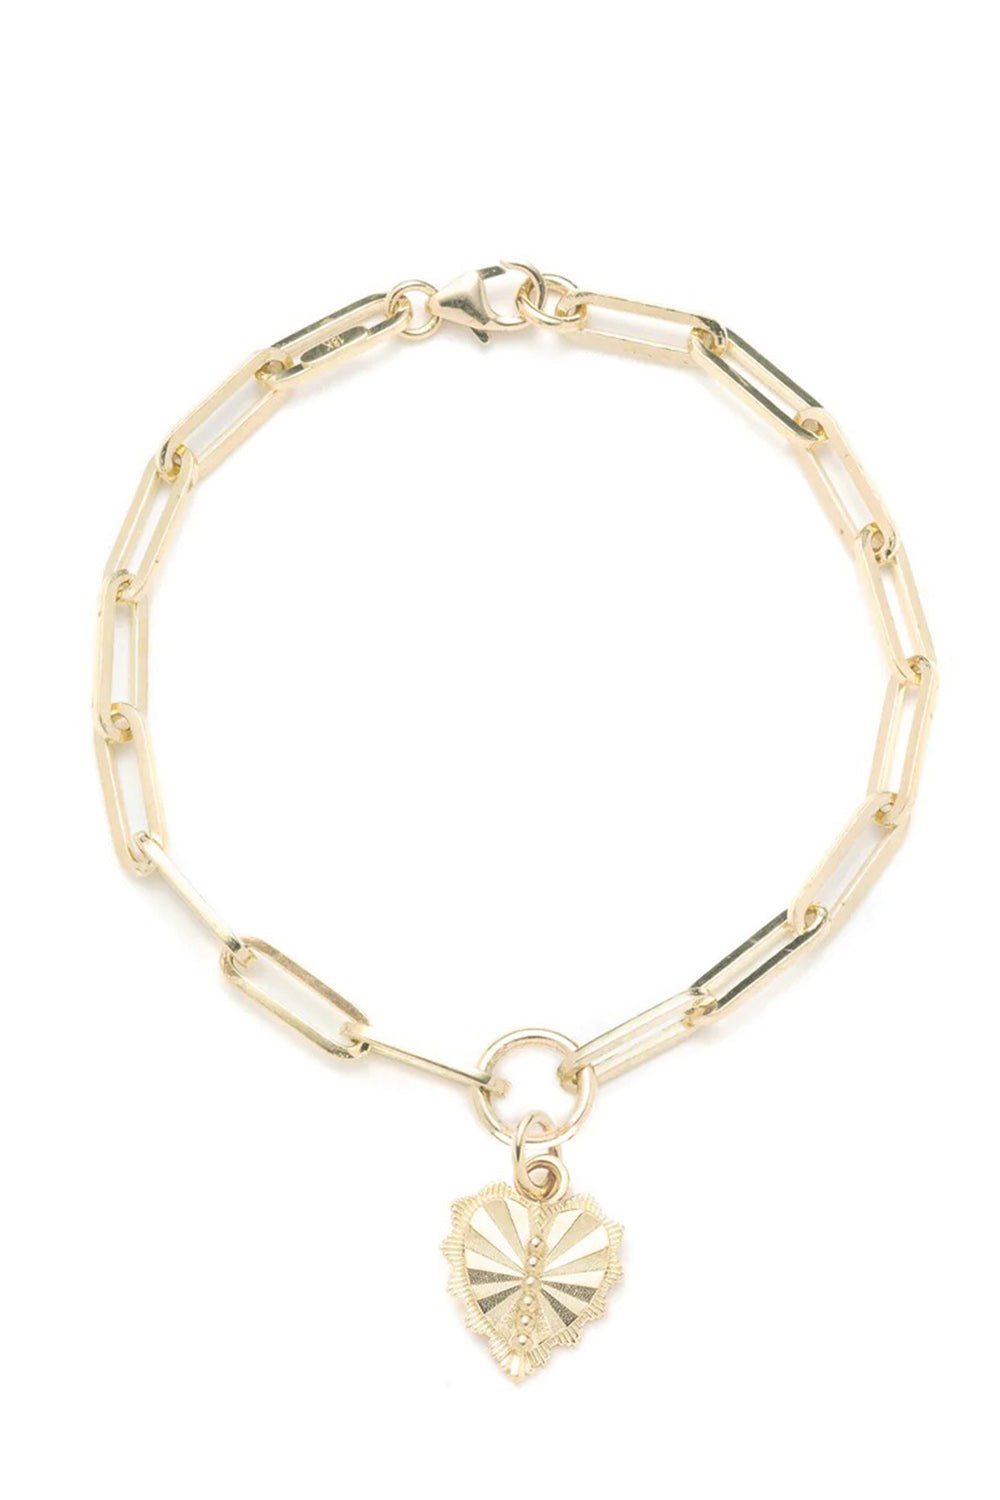 FOUNDRAE-Reflection Heart - Love Classic Fob Clip Chain Bracelet-YELLOW GOLD